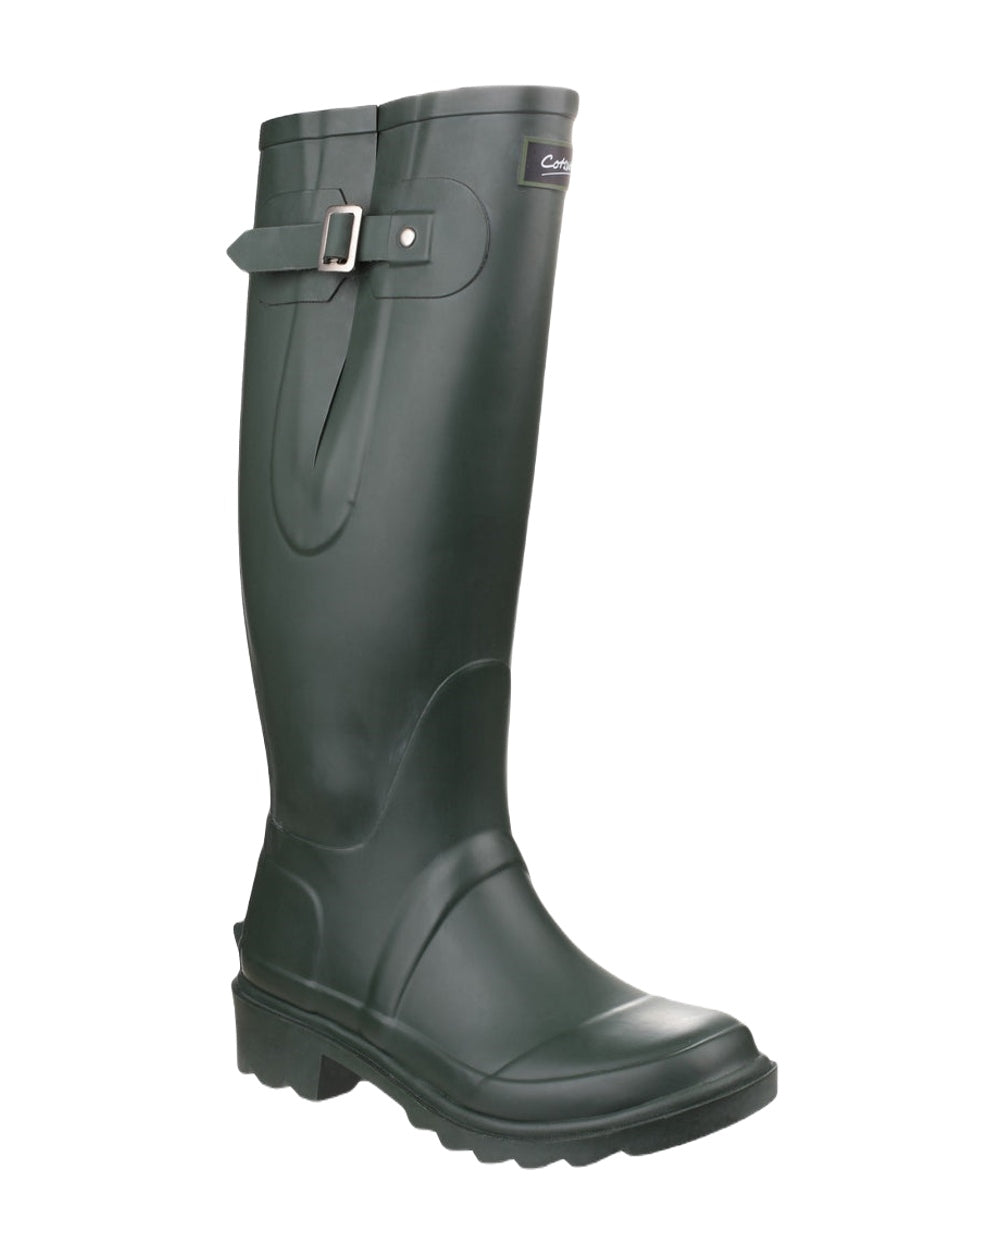 Green coloured Cotswold Ragley Waterproof Wellington Boots on white background 